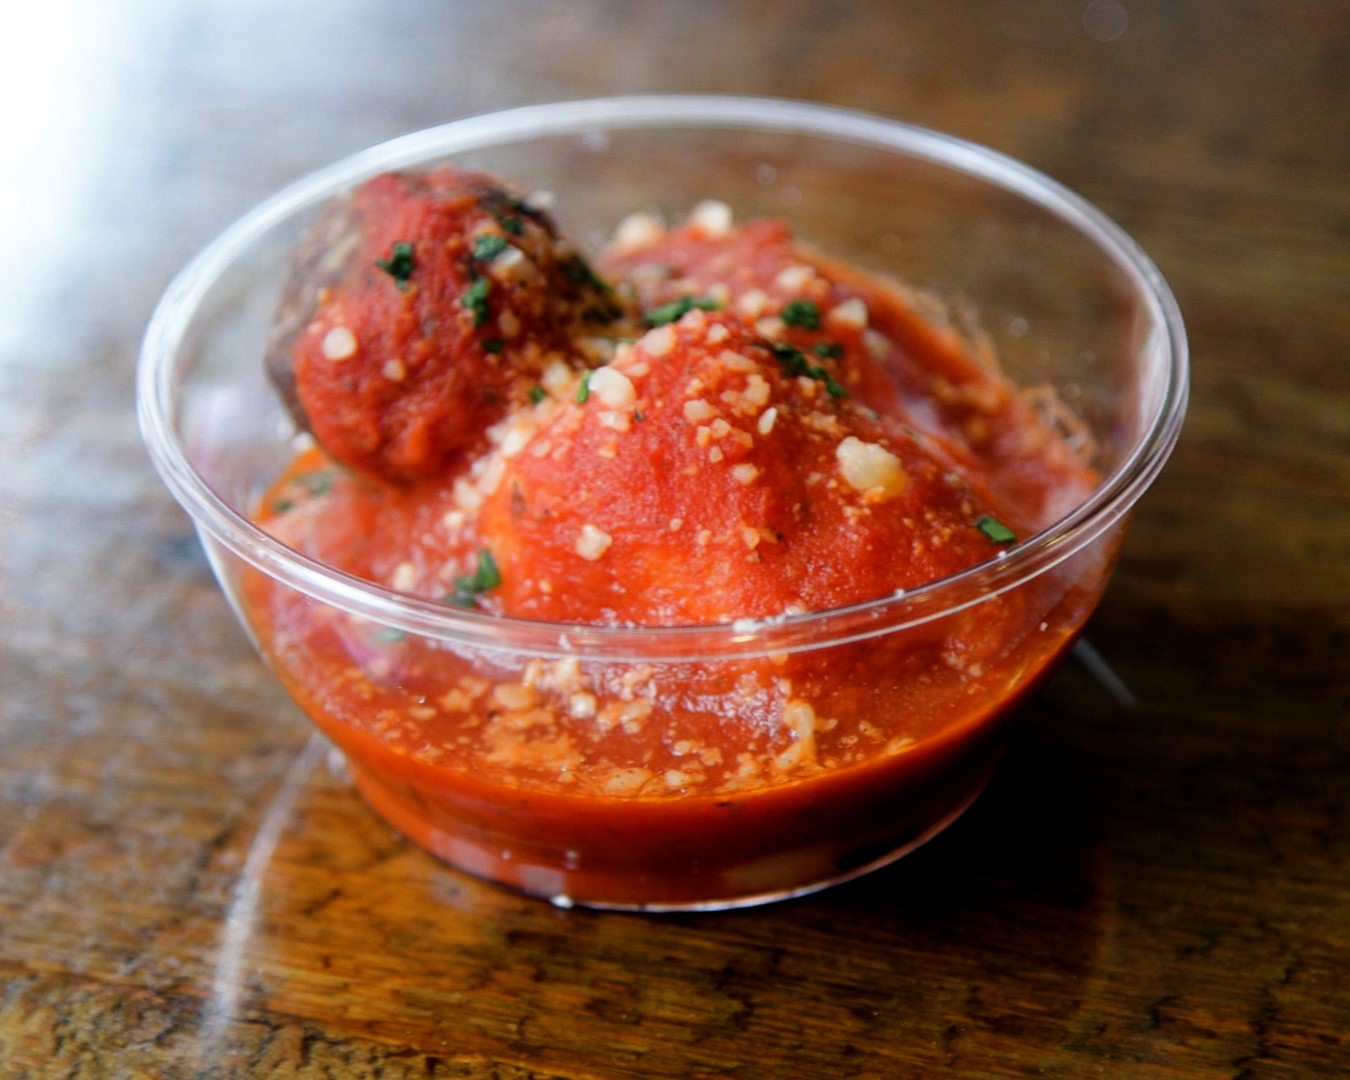 A photo of a mini meatball cup sample at Osteria.